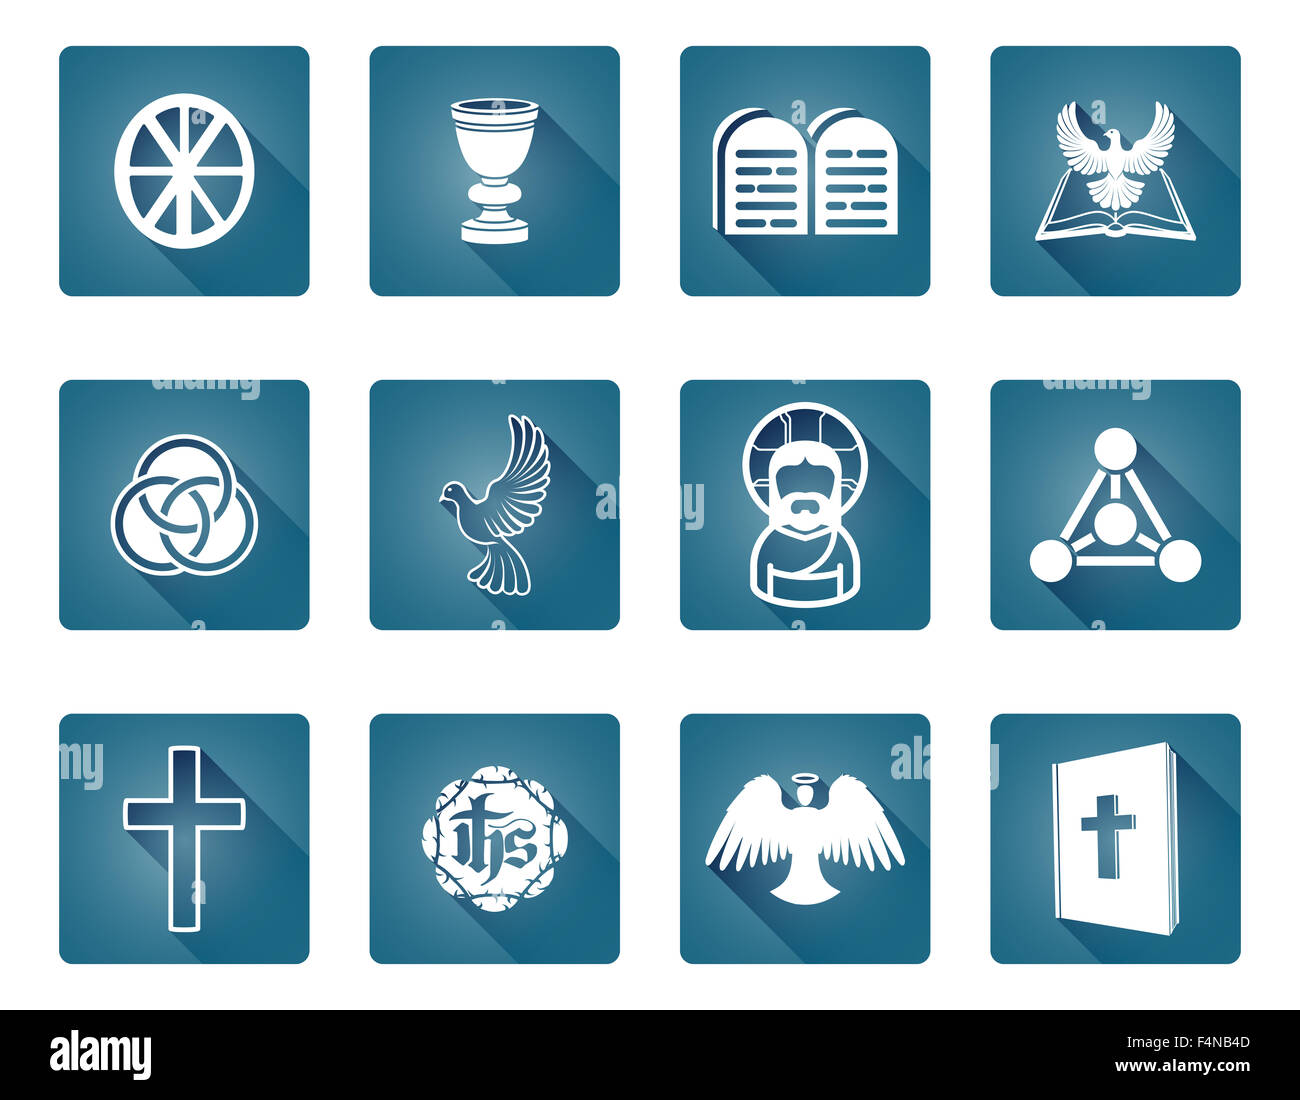 A set of Christian religious icons and symbols Stock Photo